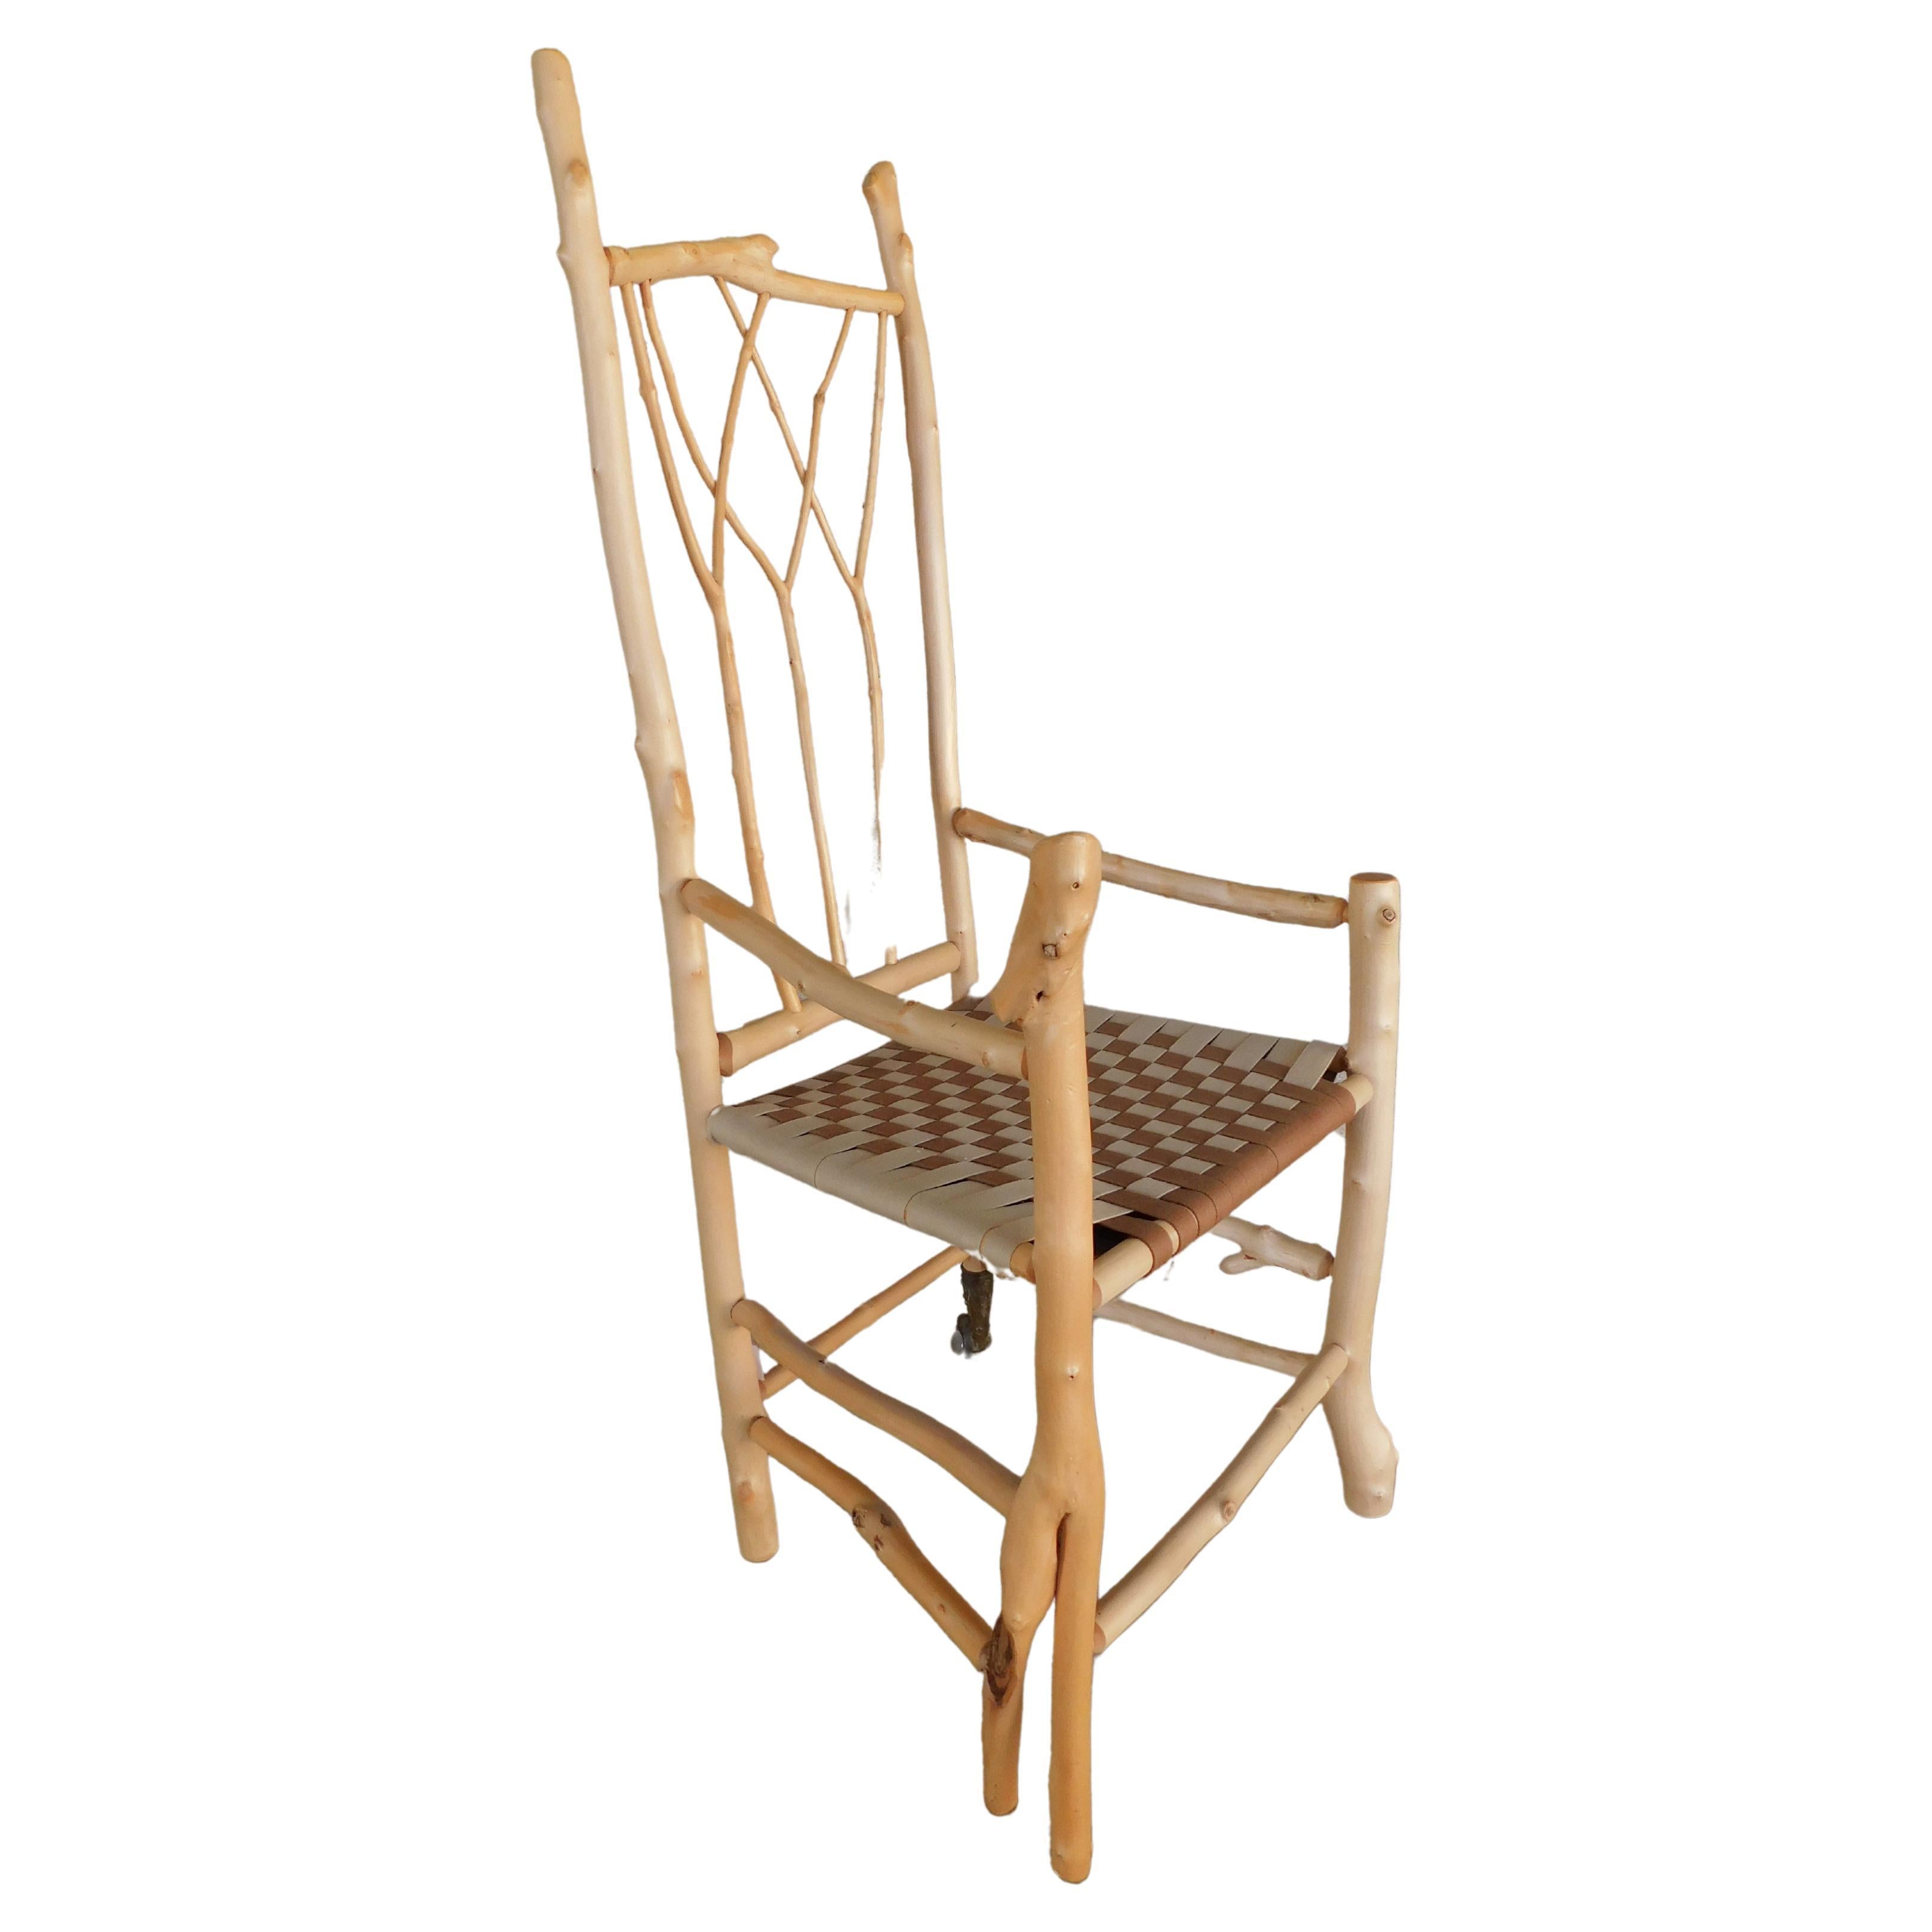 Daniel Mack Signed Stripped Bark Maple Stick Arm Chair For Sale